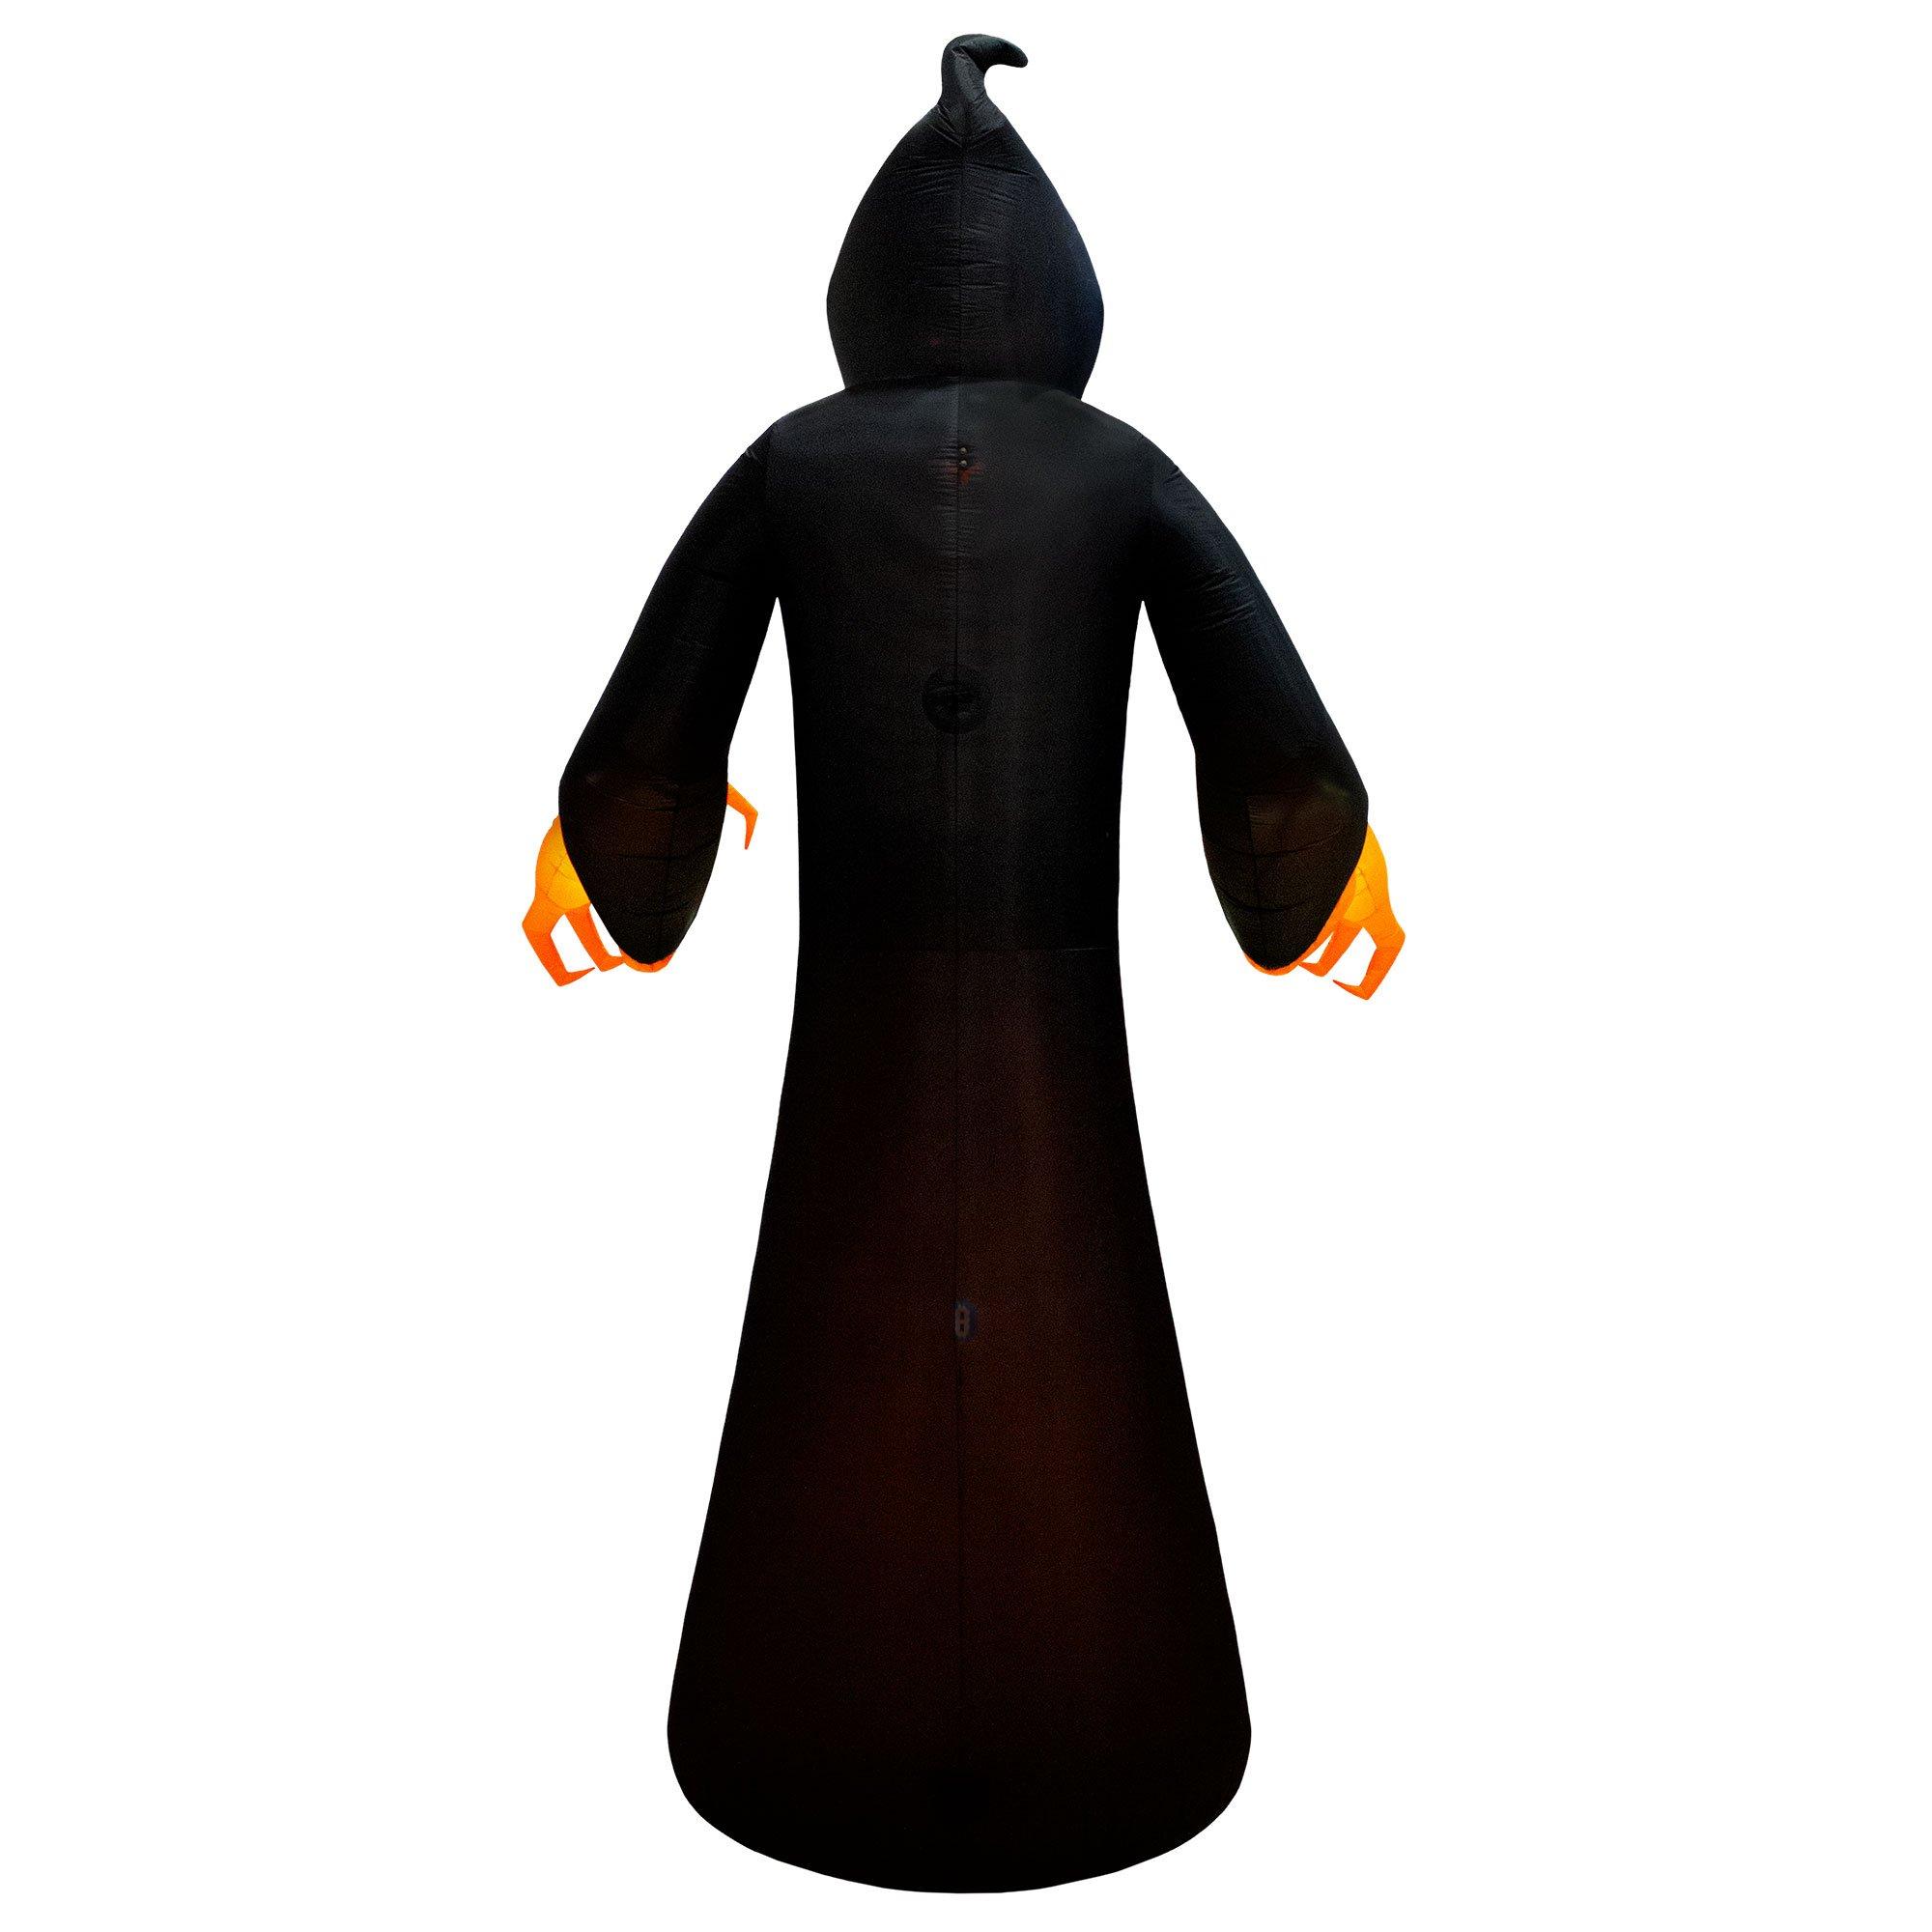 Swirling Light-Up Flaming Reaper Inflatable Yard Decoration, 7.5ft x 15ft